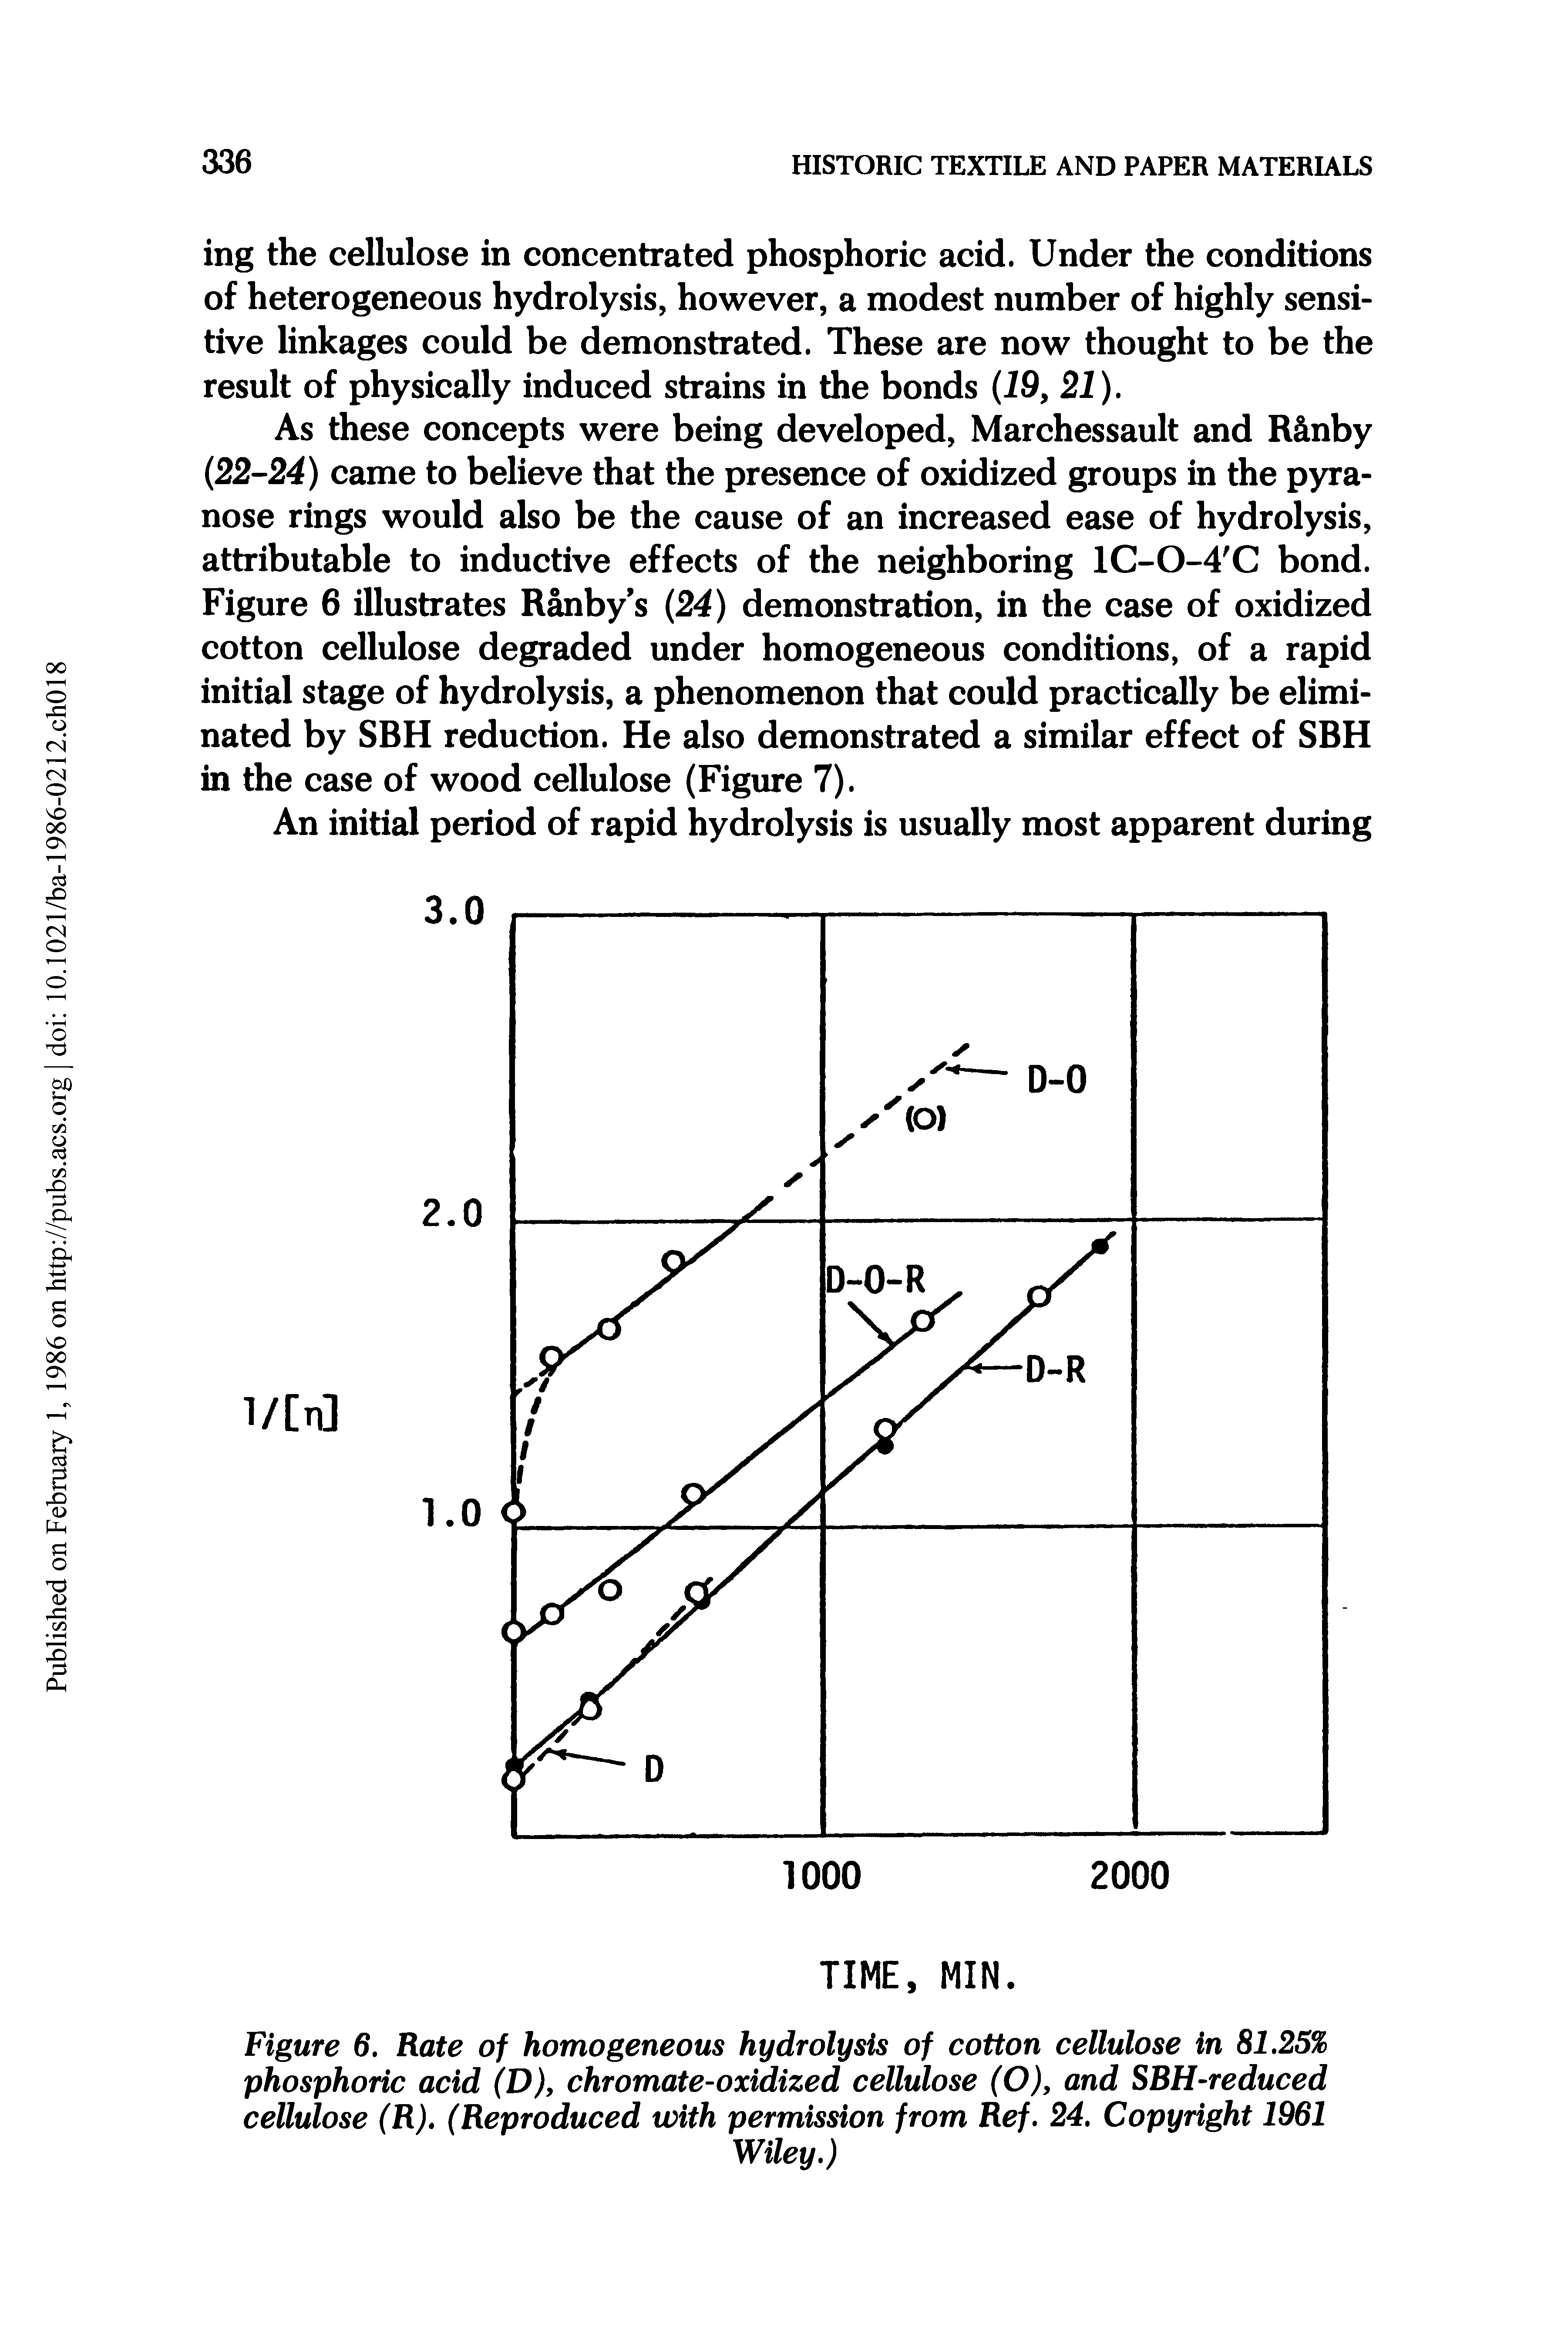 Figure 6. Rate of homogeneous hydrolysis of cotton cellulose in 81.25% phosphoric acid (D), chromate-oxidized cellulose (O), and SBH-reduced cellulose (R). (Reproduced with permission from Ref. 24. Copyright 1961...